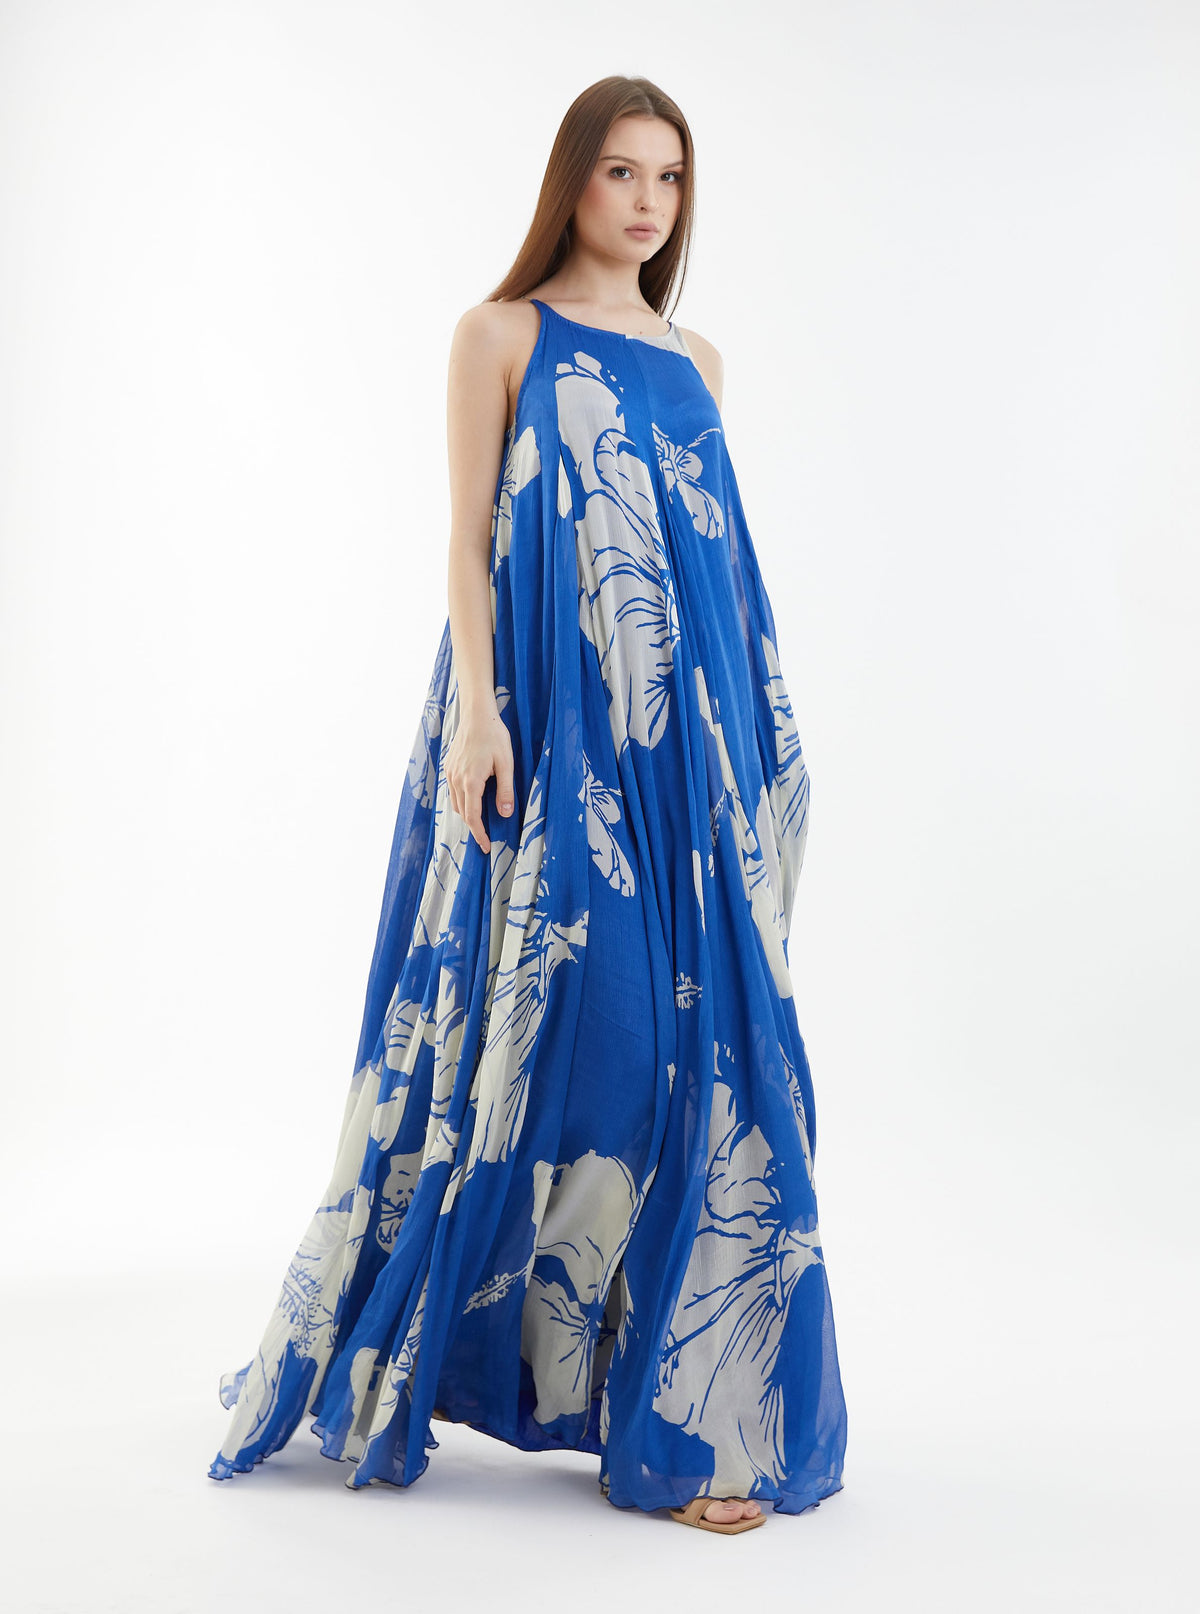 BLUE AND WHITE FLORAL SLEEVELESS LONG DRESS